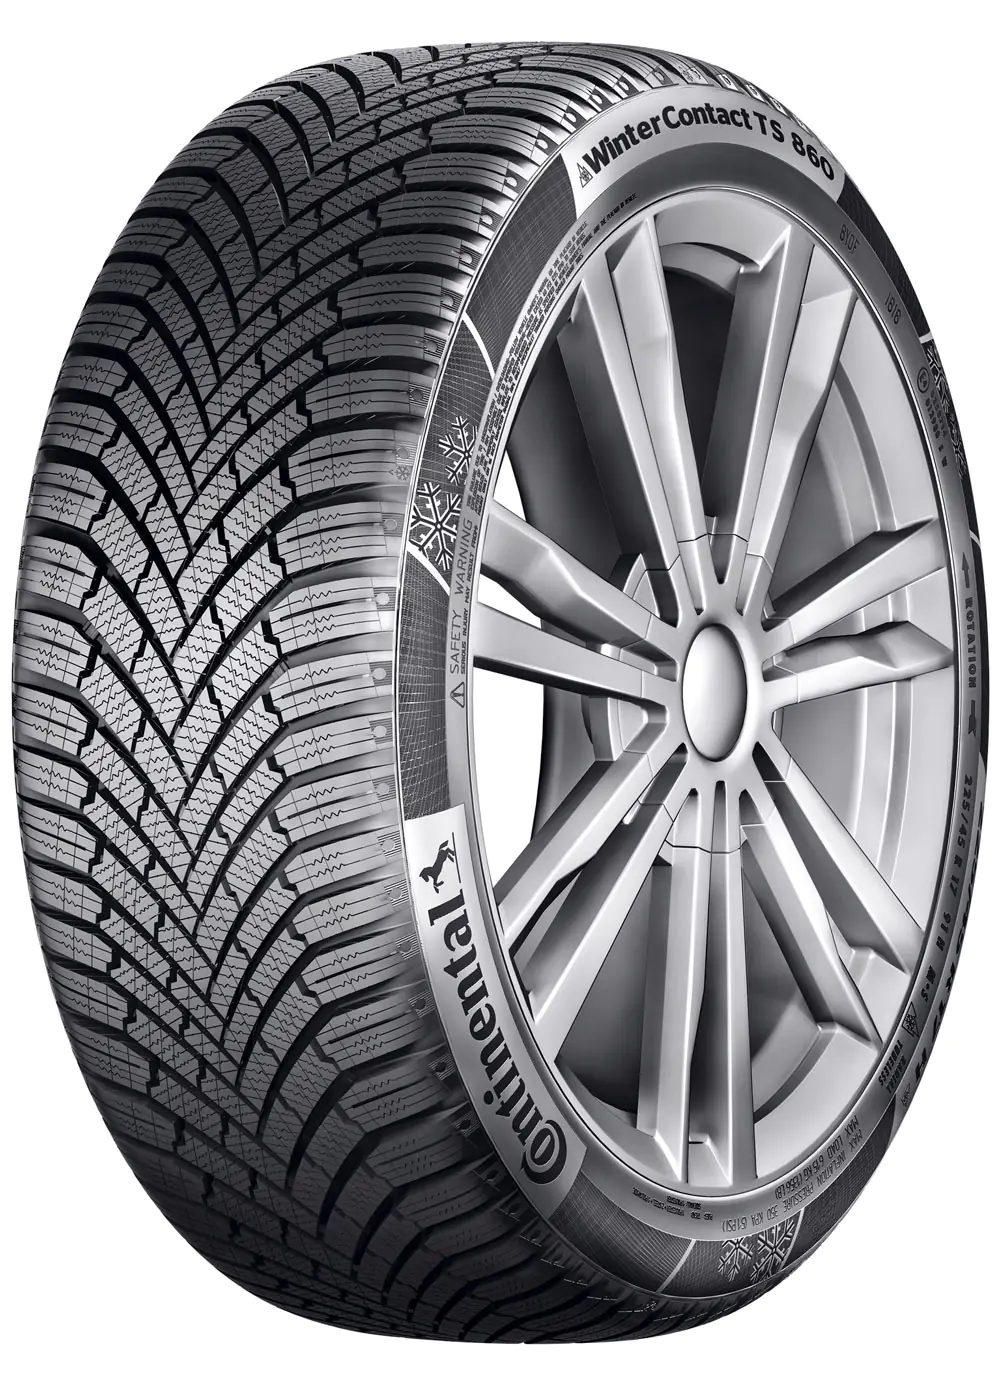 Gomme Autovettura Continental 285/40 R19 107V WinterContact TS 860 S XL M+S Invernale